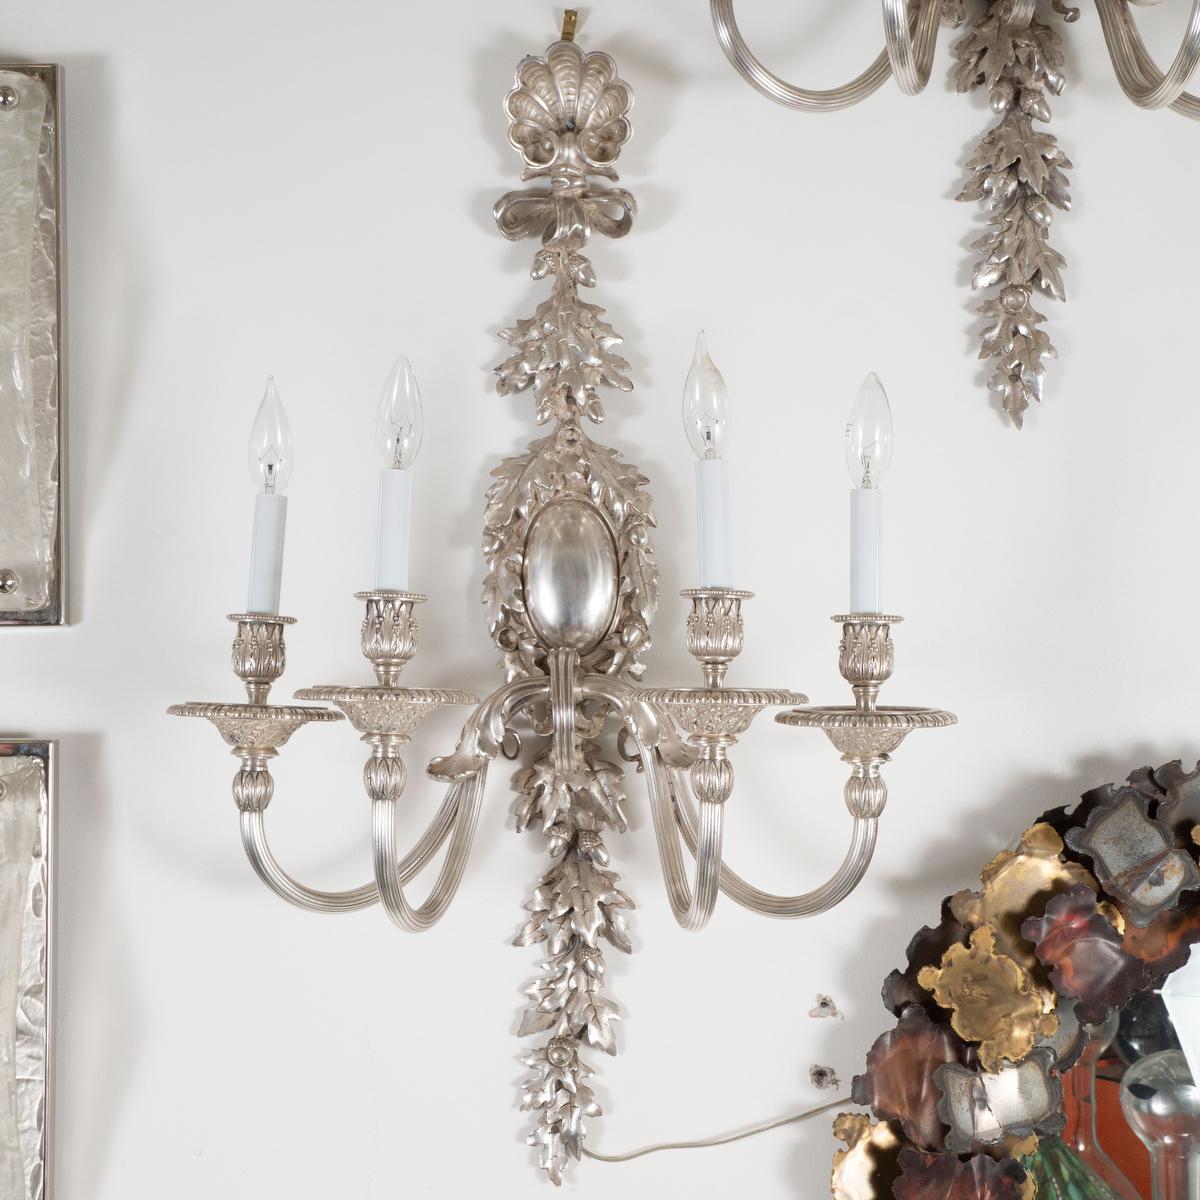 Pair of large silvered bronze candelabra style sconces with cast leaf and shell motif and fluted arms.